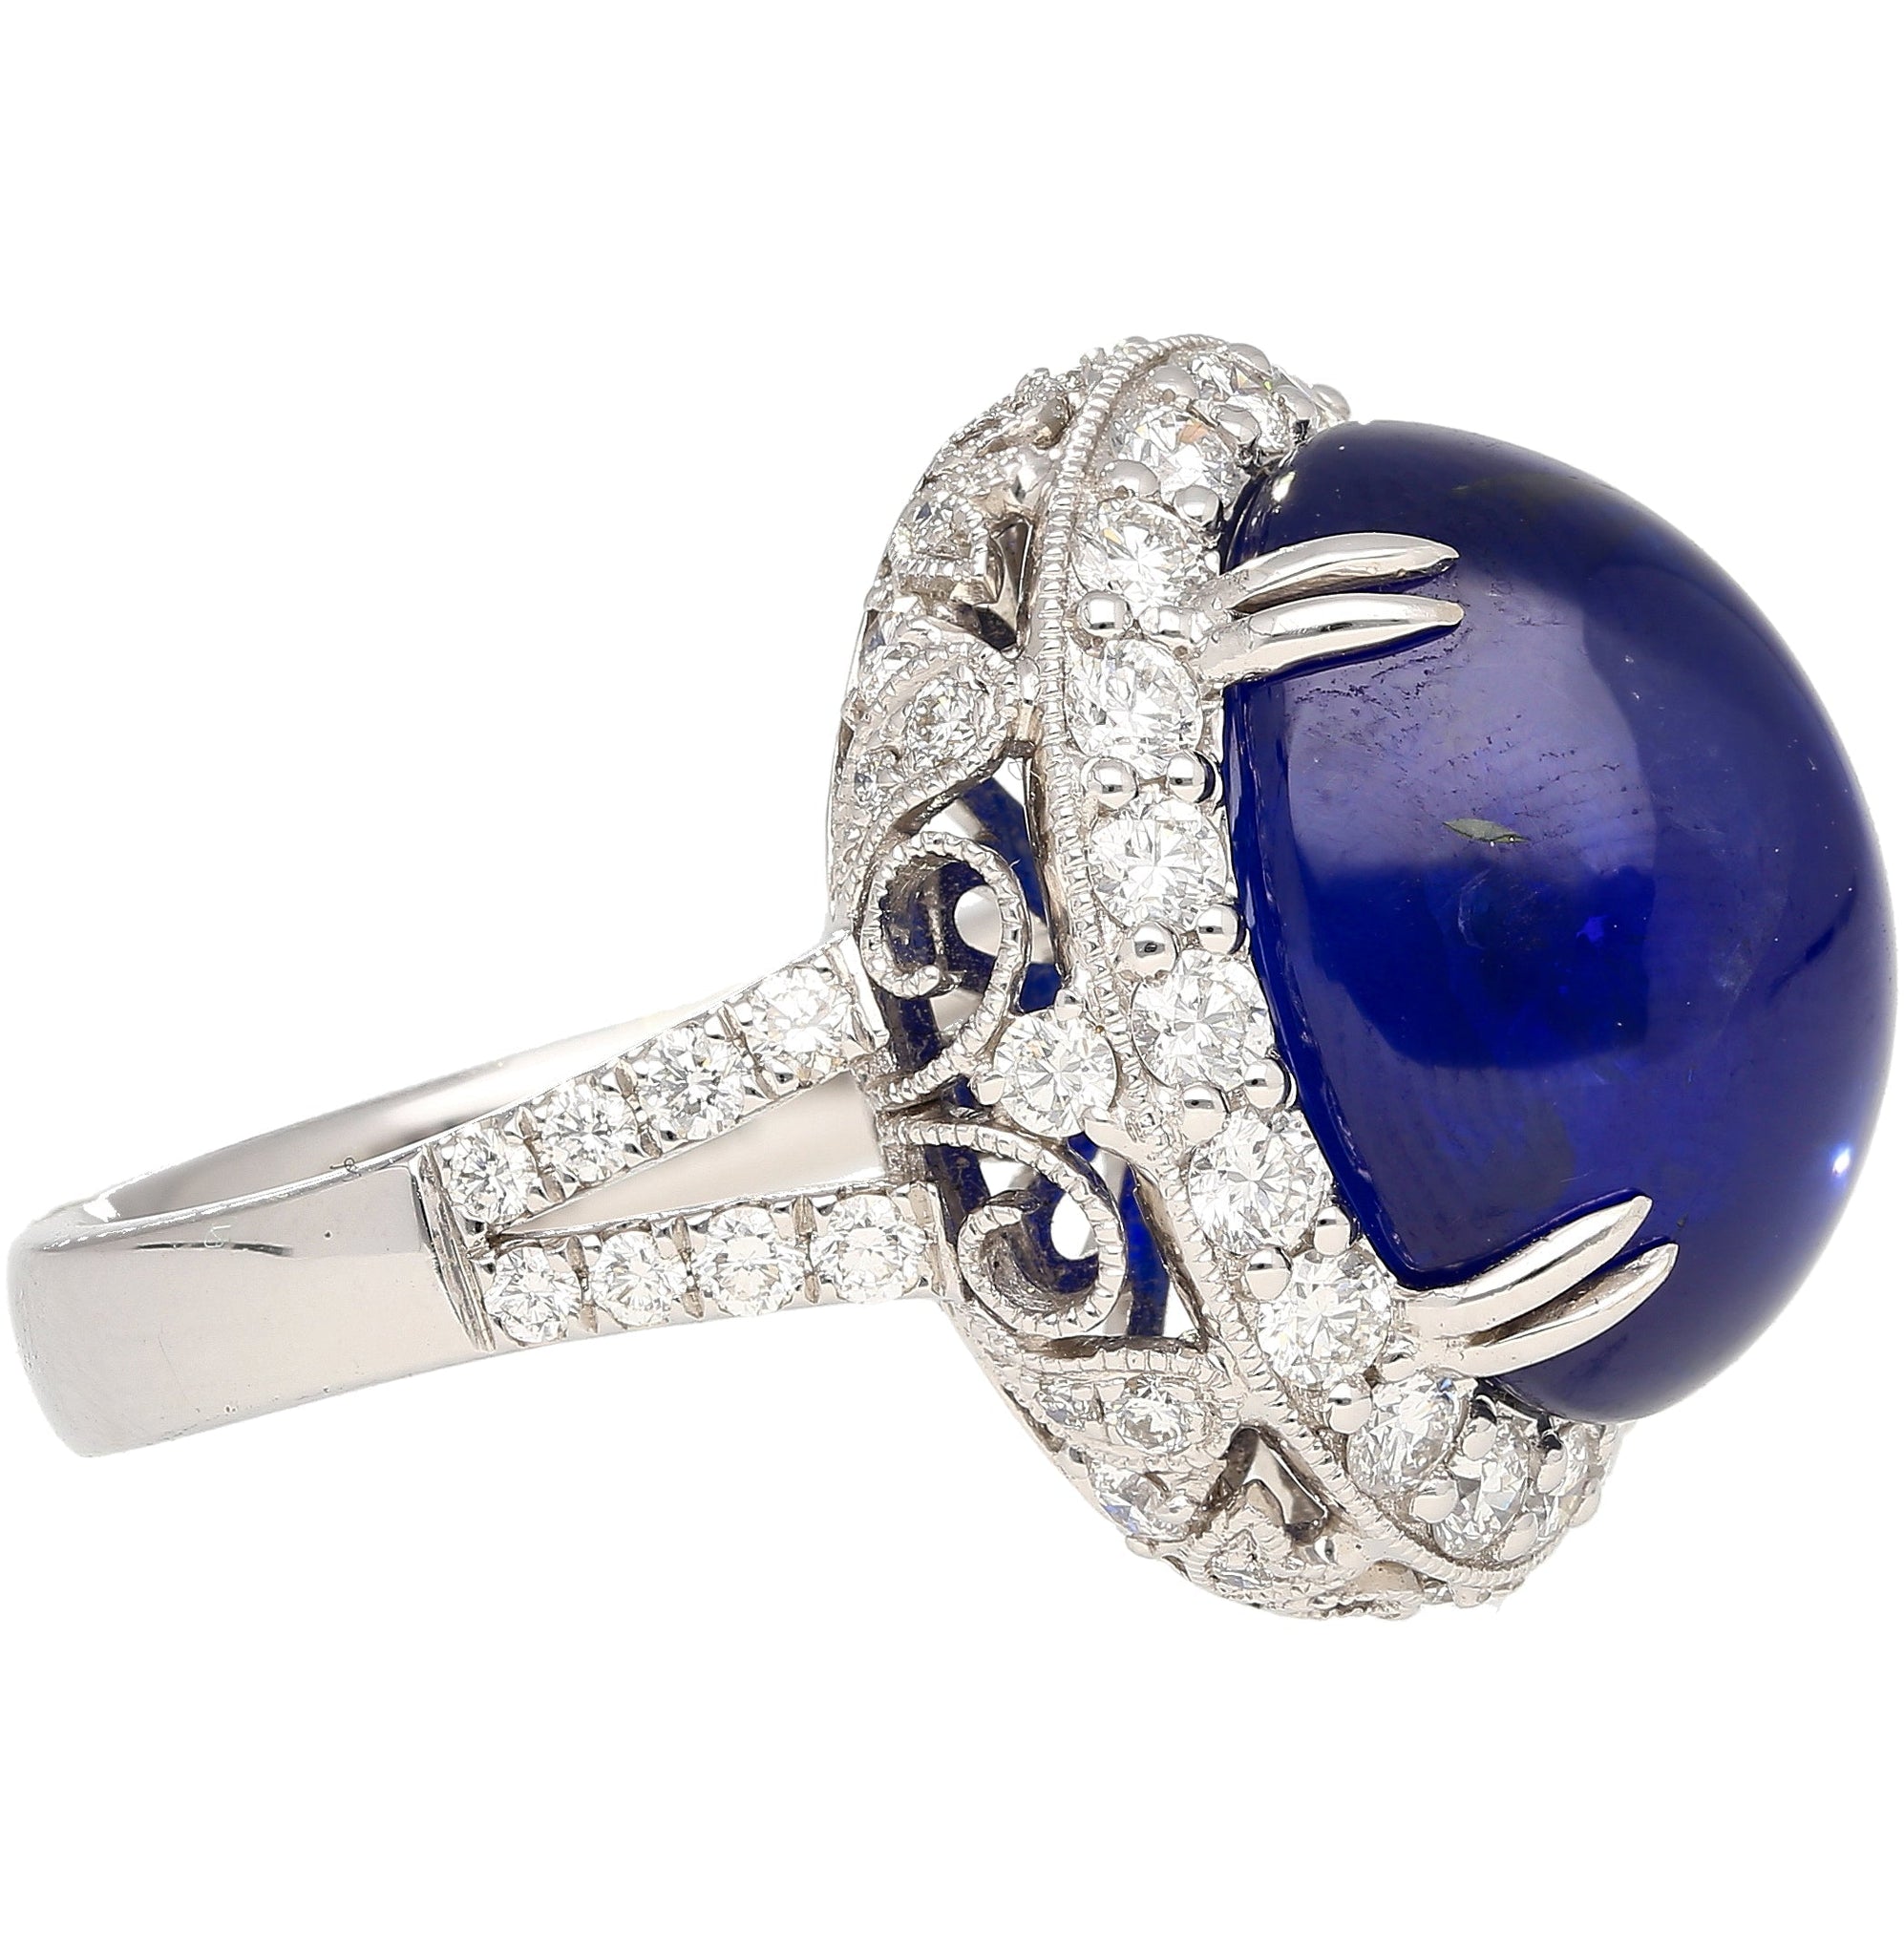 AGL Certified 16.68 Carat Cabochon Cut Ceylon Blue Sapphire Ring with Diamond Halo and Filigree Set 18K White Gold